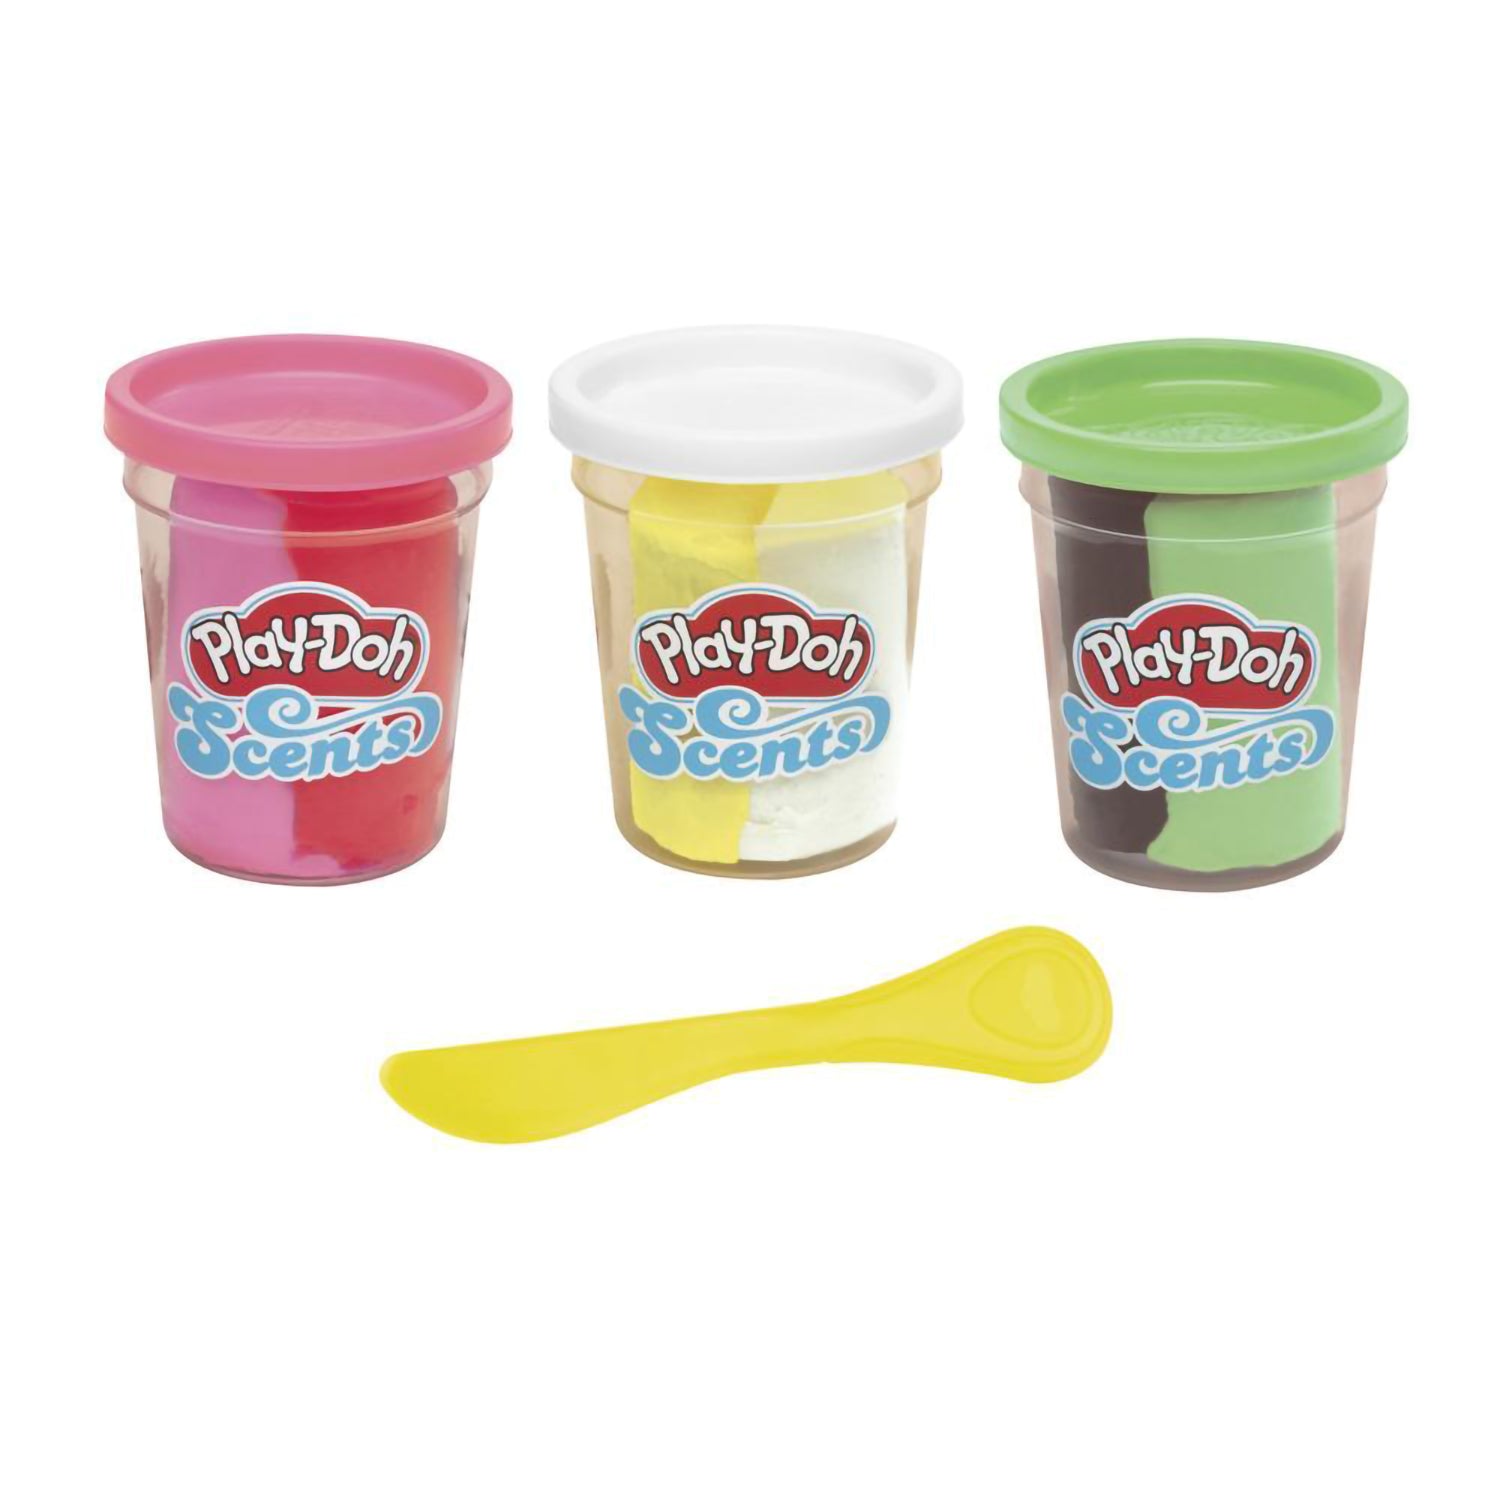 Play-Doh Scents 3 Pack - Ice Cream